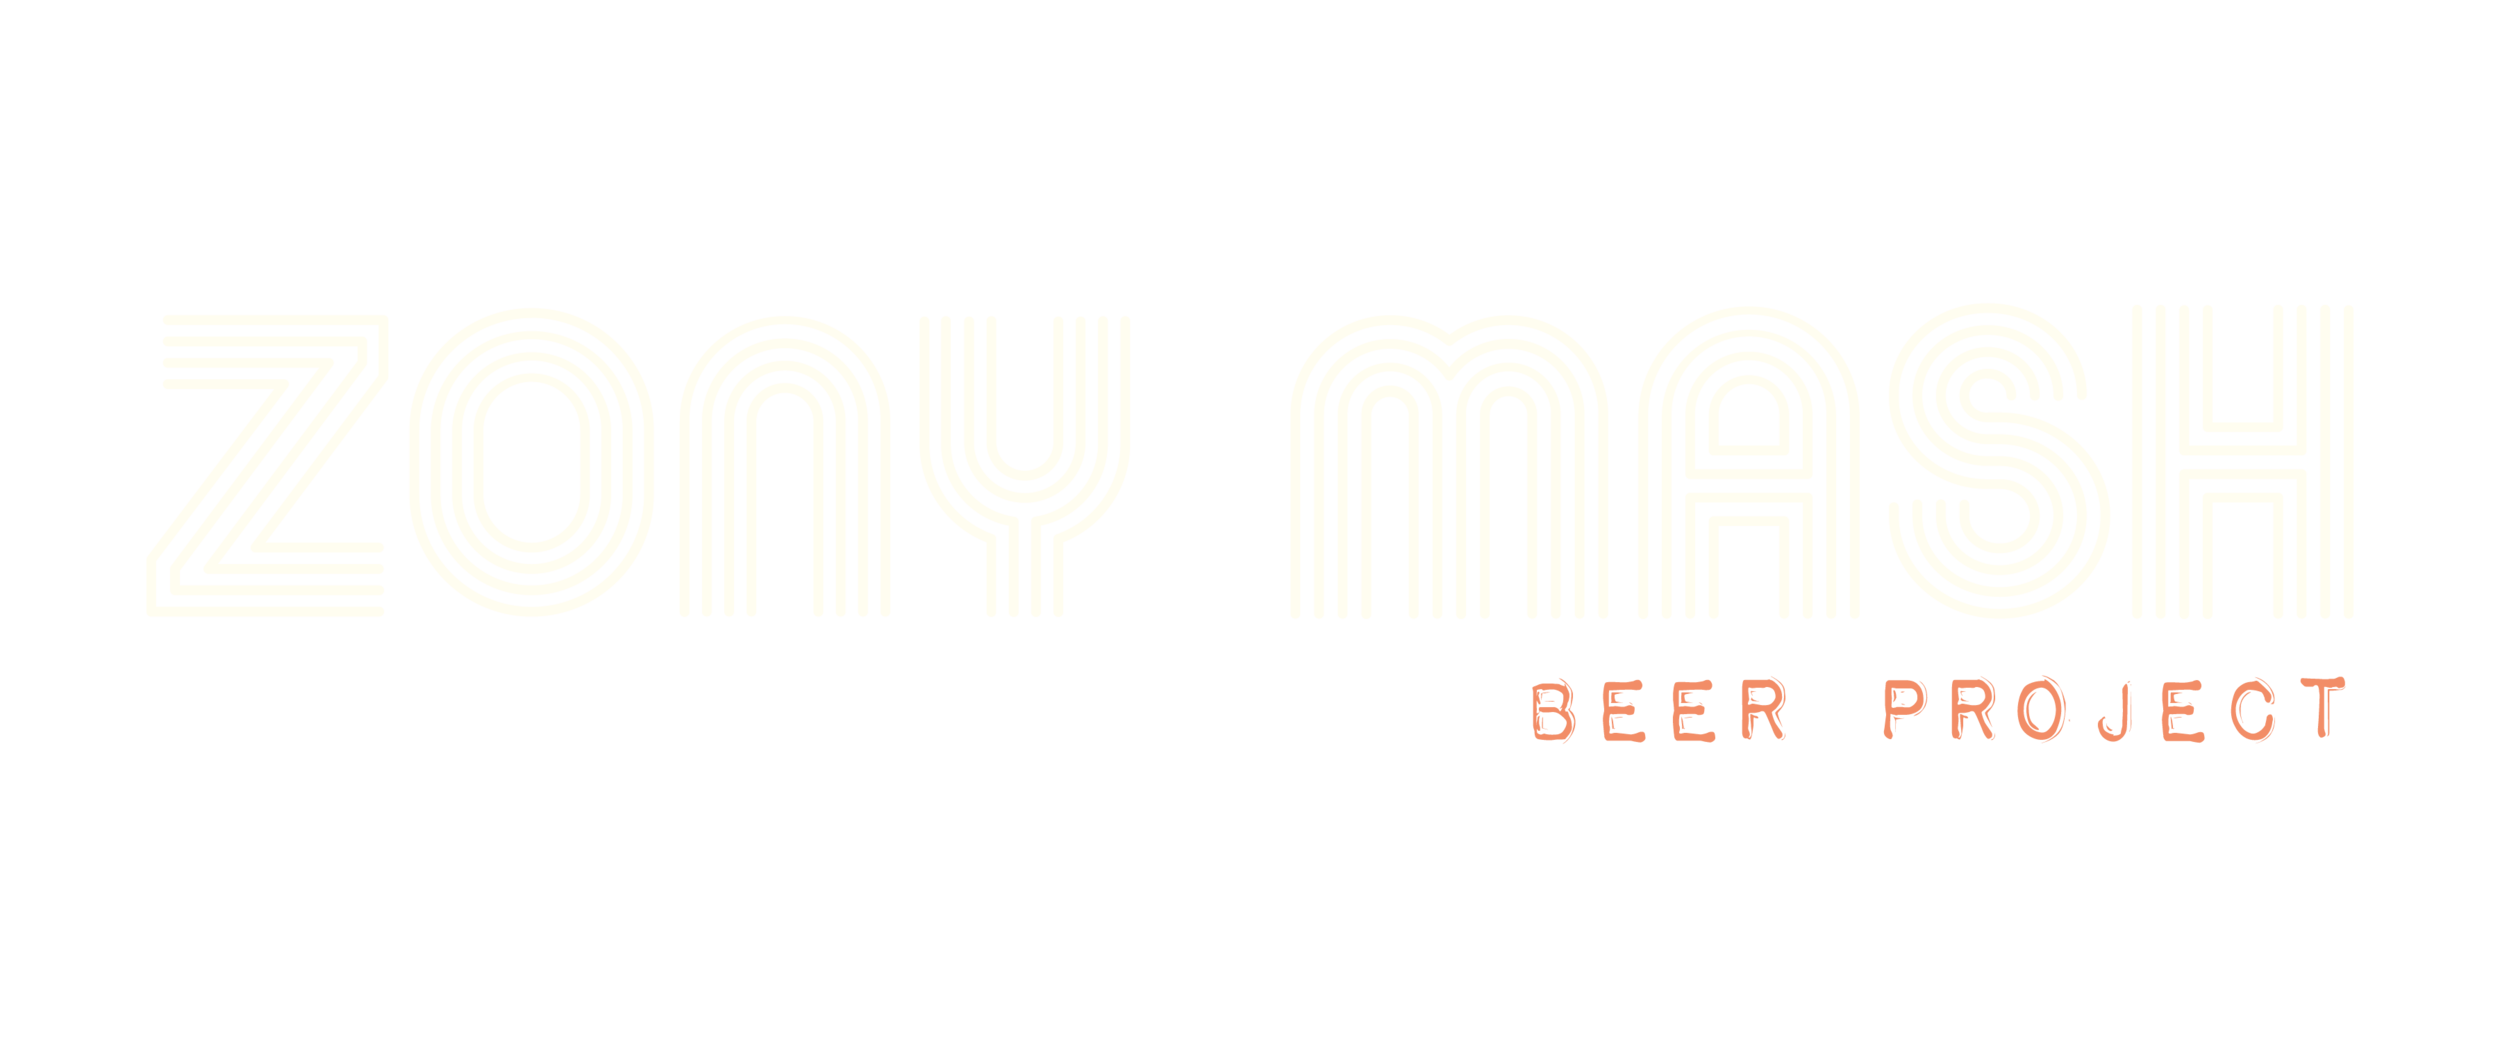 Zony Mash Beer Project